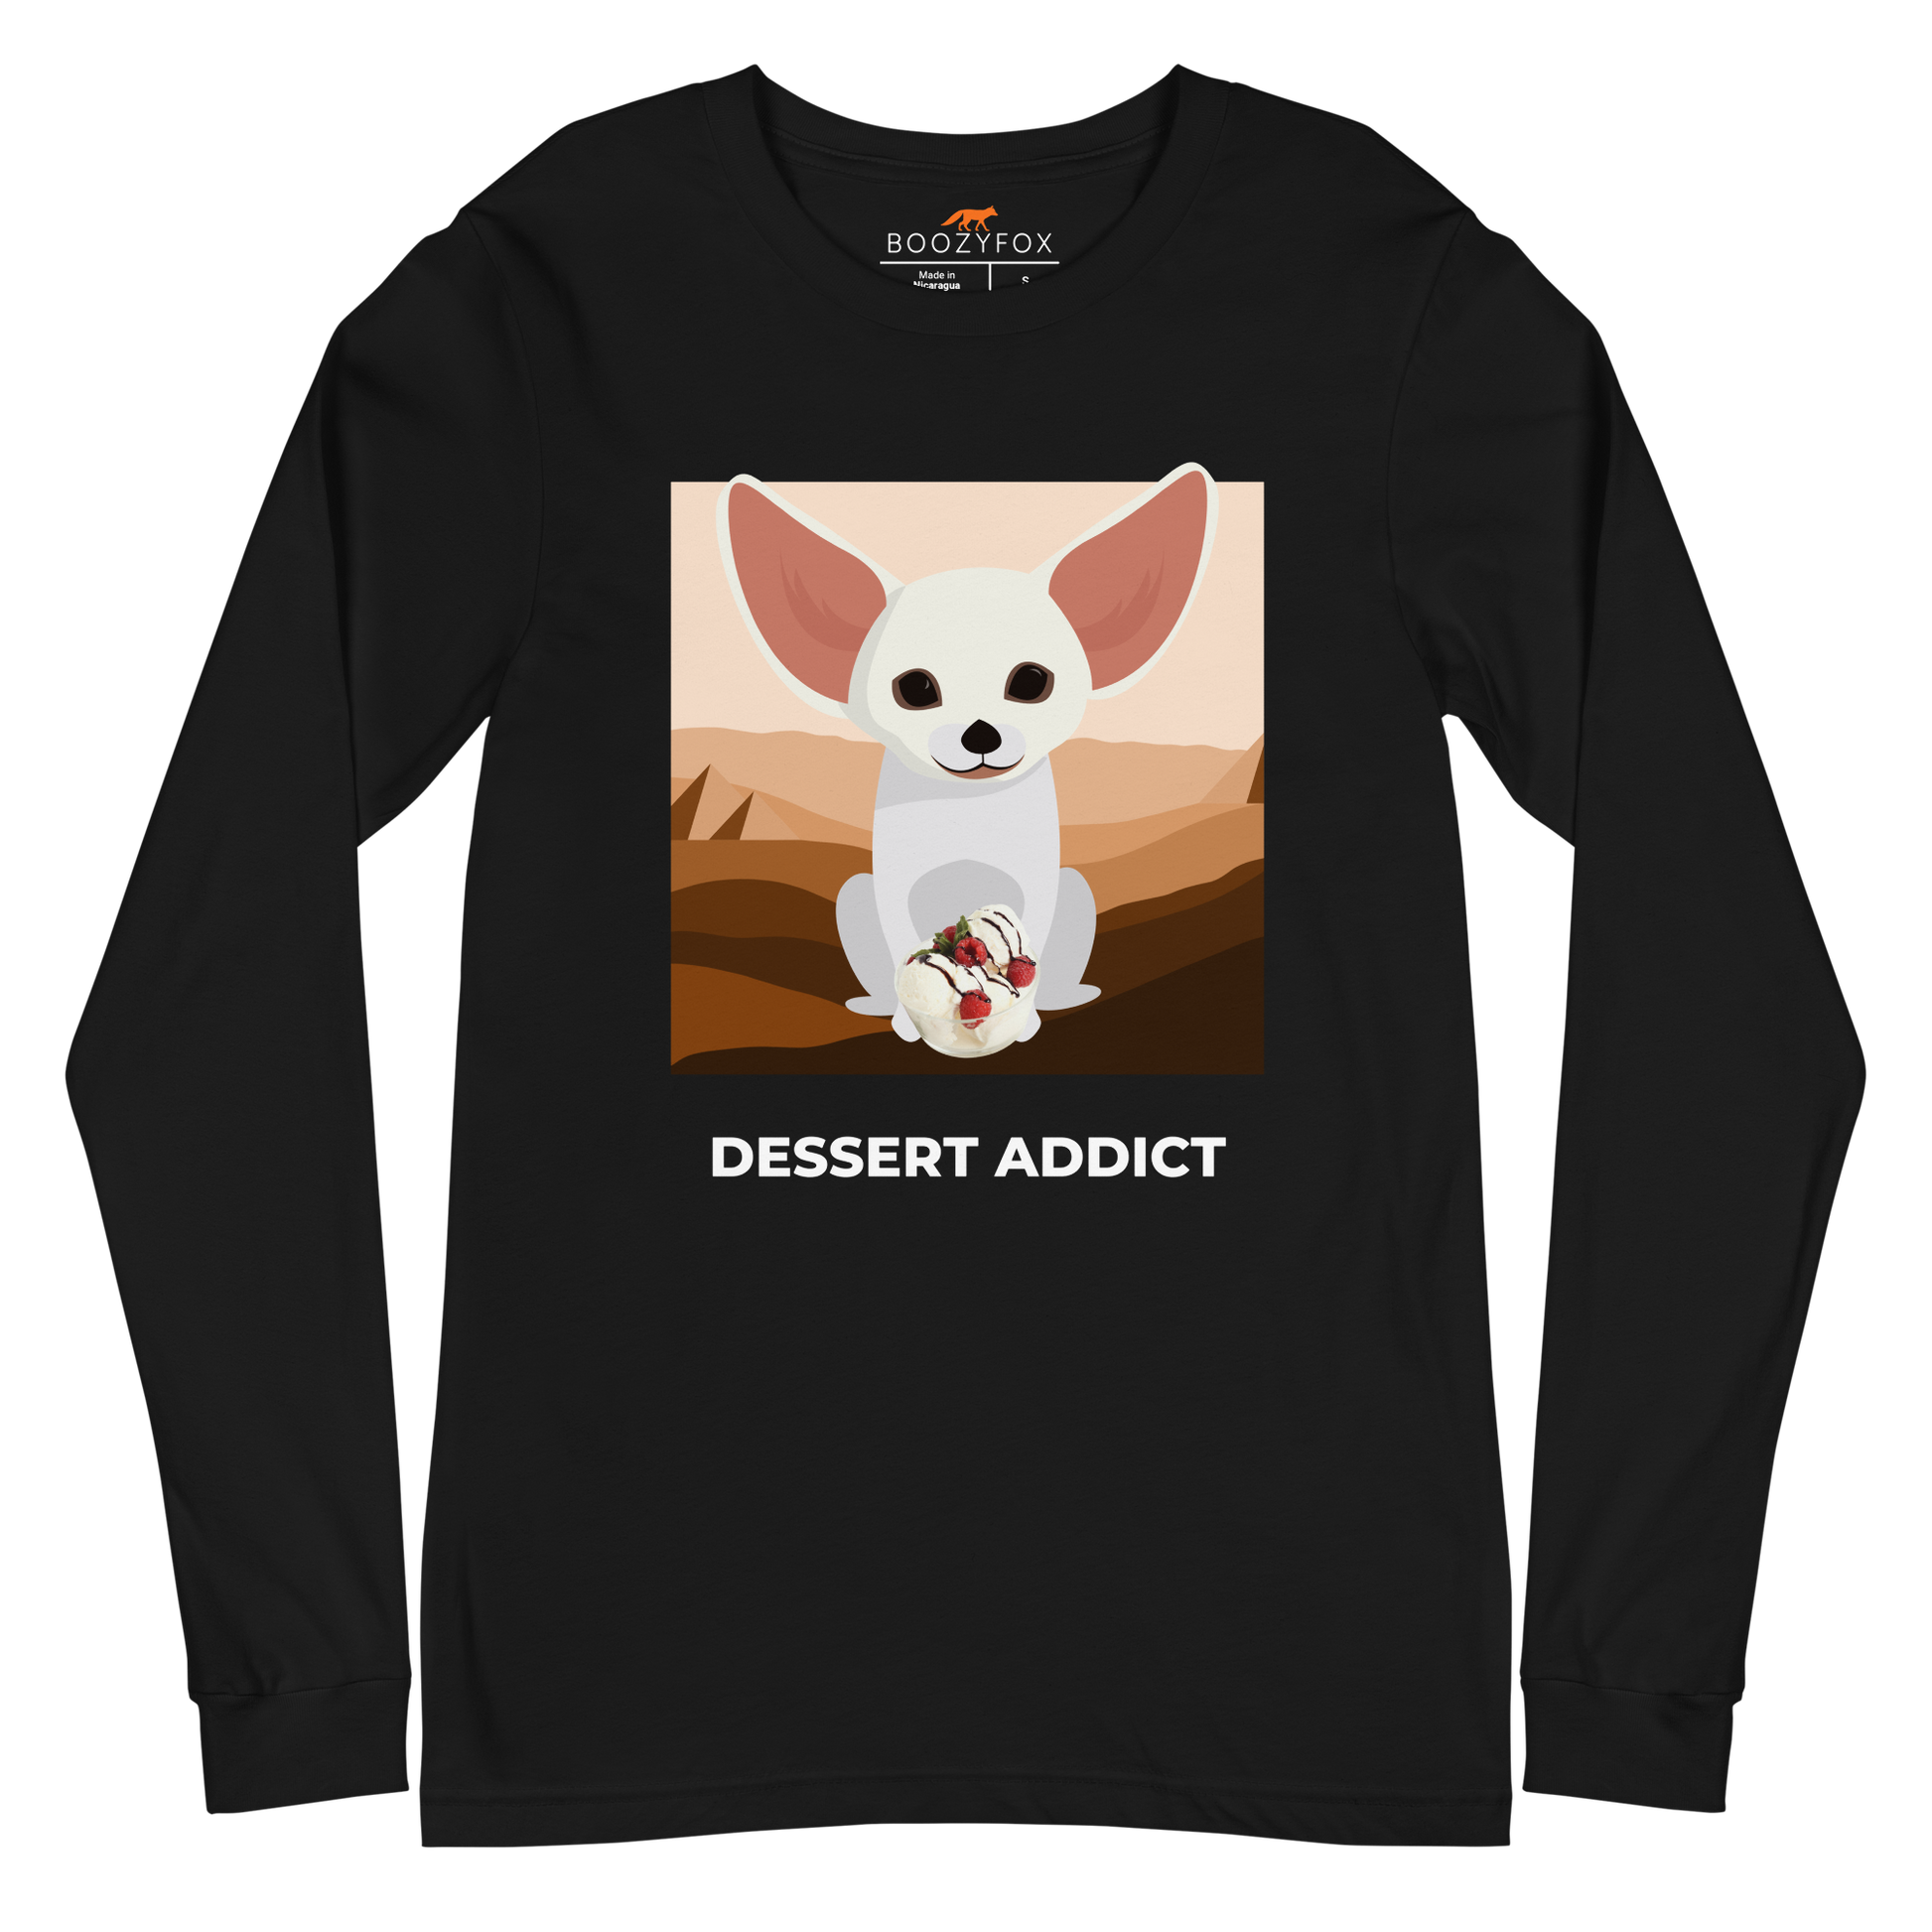 Black Fennec Fox Long Sleeve Tee featuring a delightful Dessert Addict graphic on the chest - Funny Fennec Fox Long Sleeve Graphic Tees - Boozy Fox